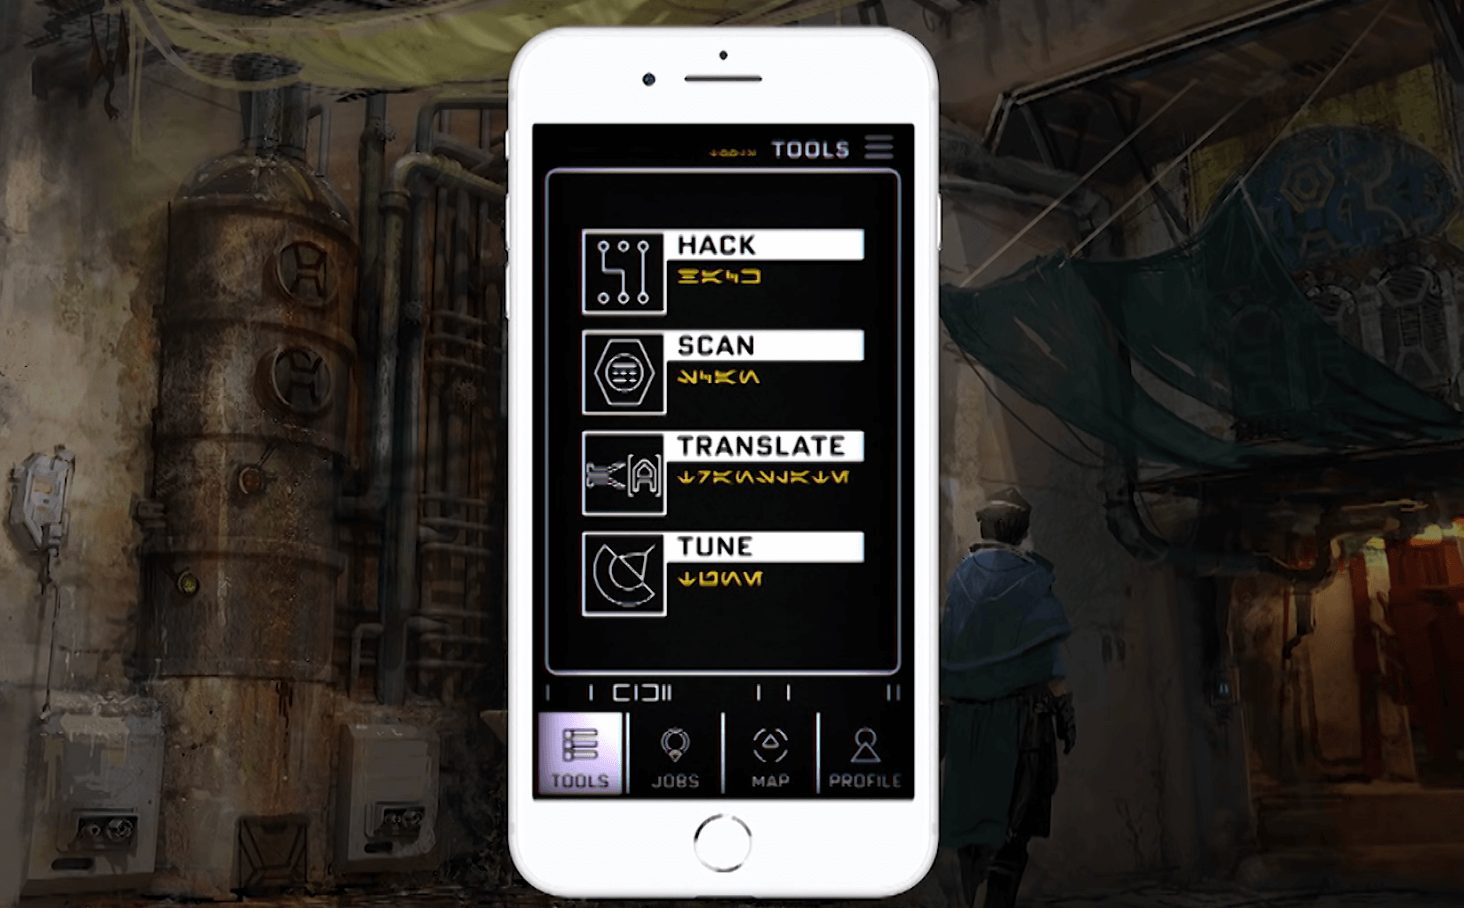 Play Disney Parks App Star Wars: Galaxy's Edge iPhone functions and game